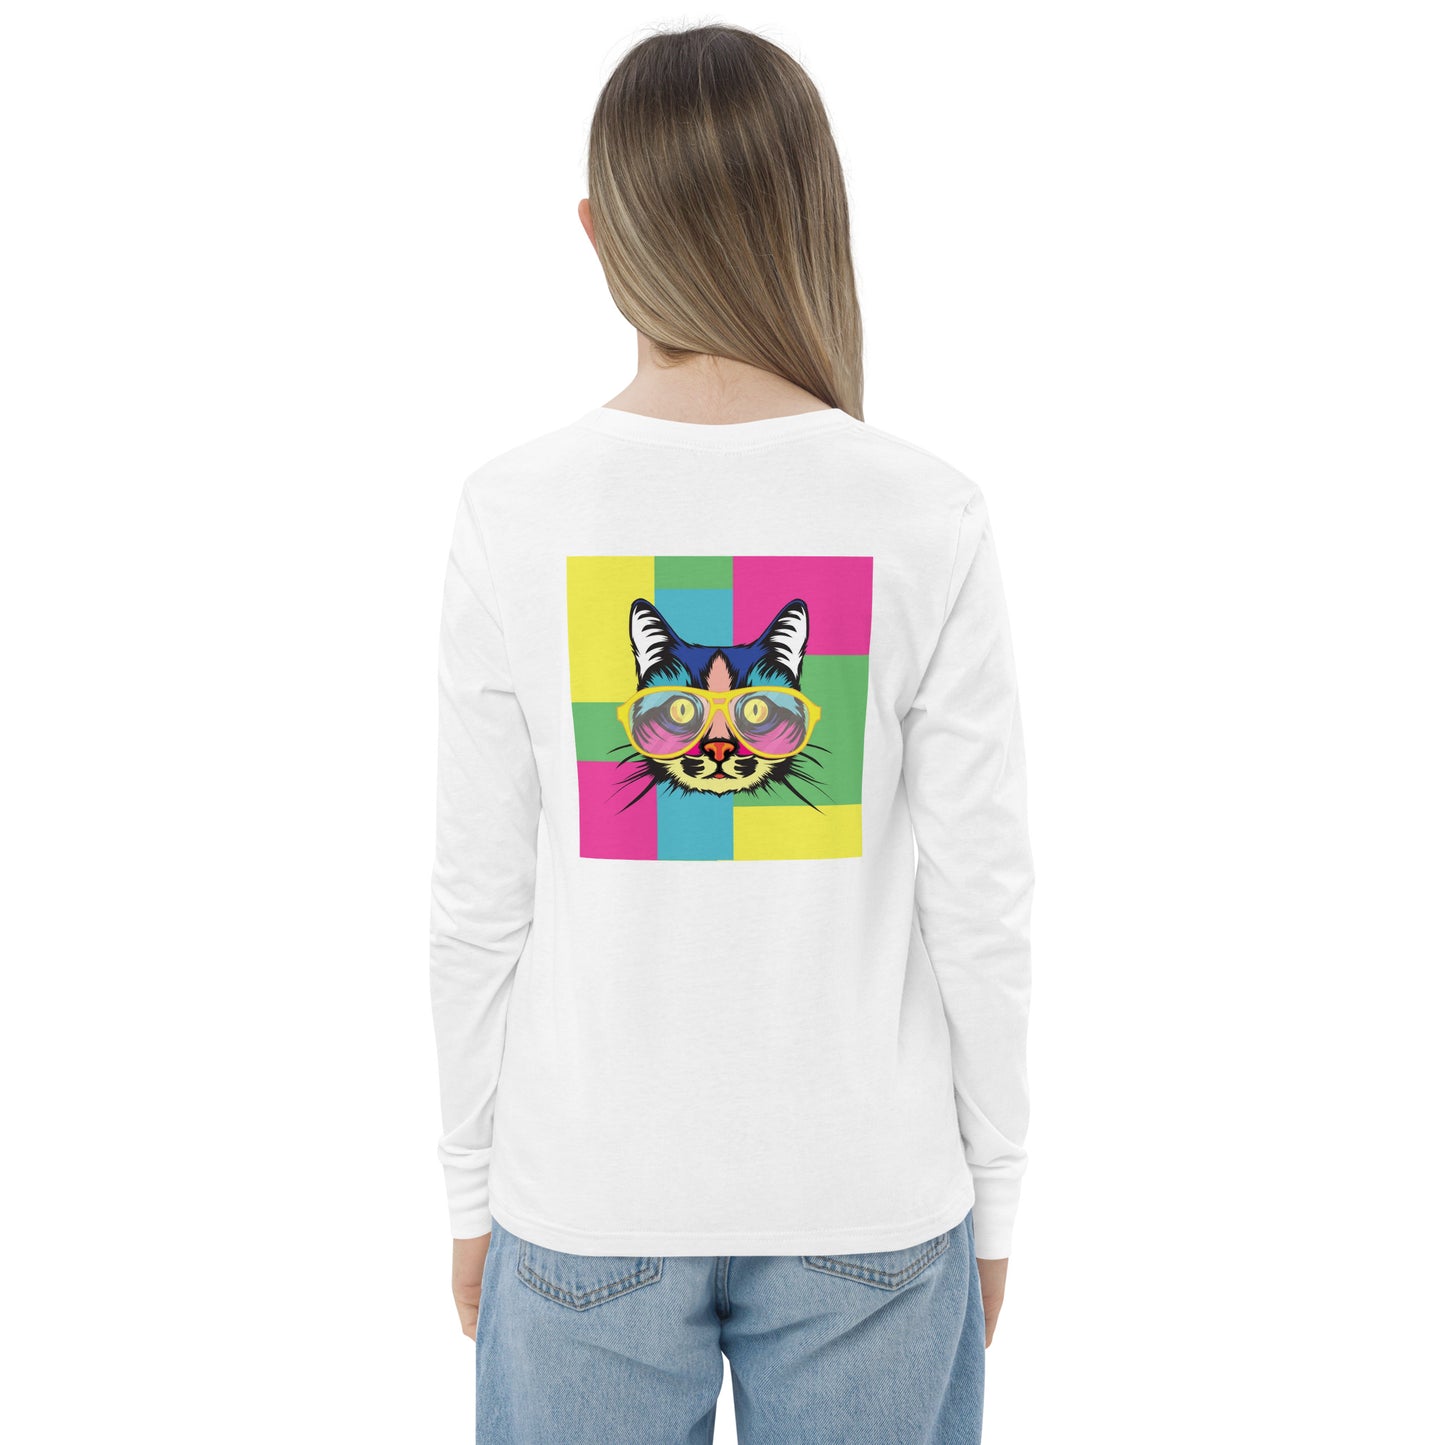 Youth long sleeve tee with Pop art design sourced Vecteezy.com